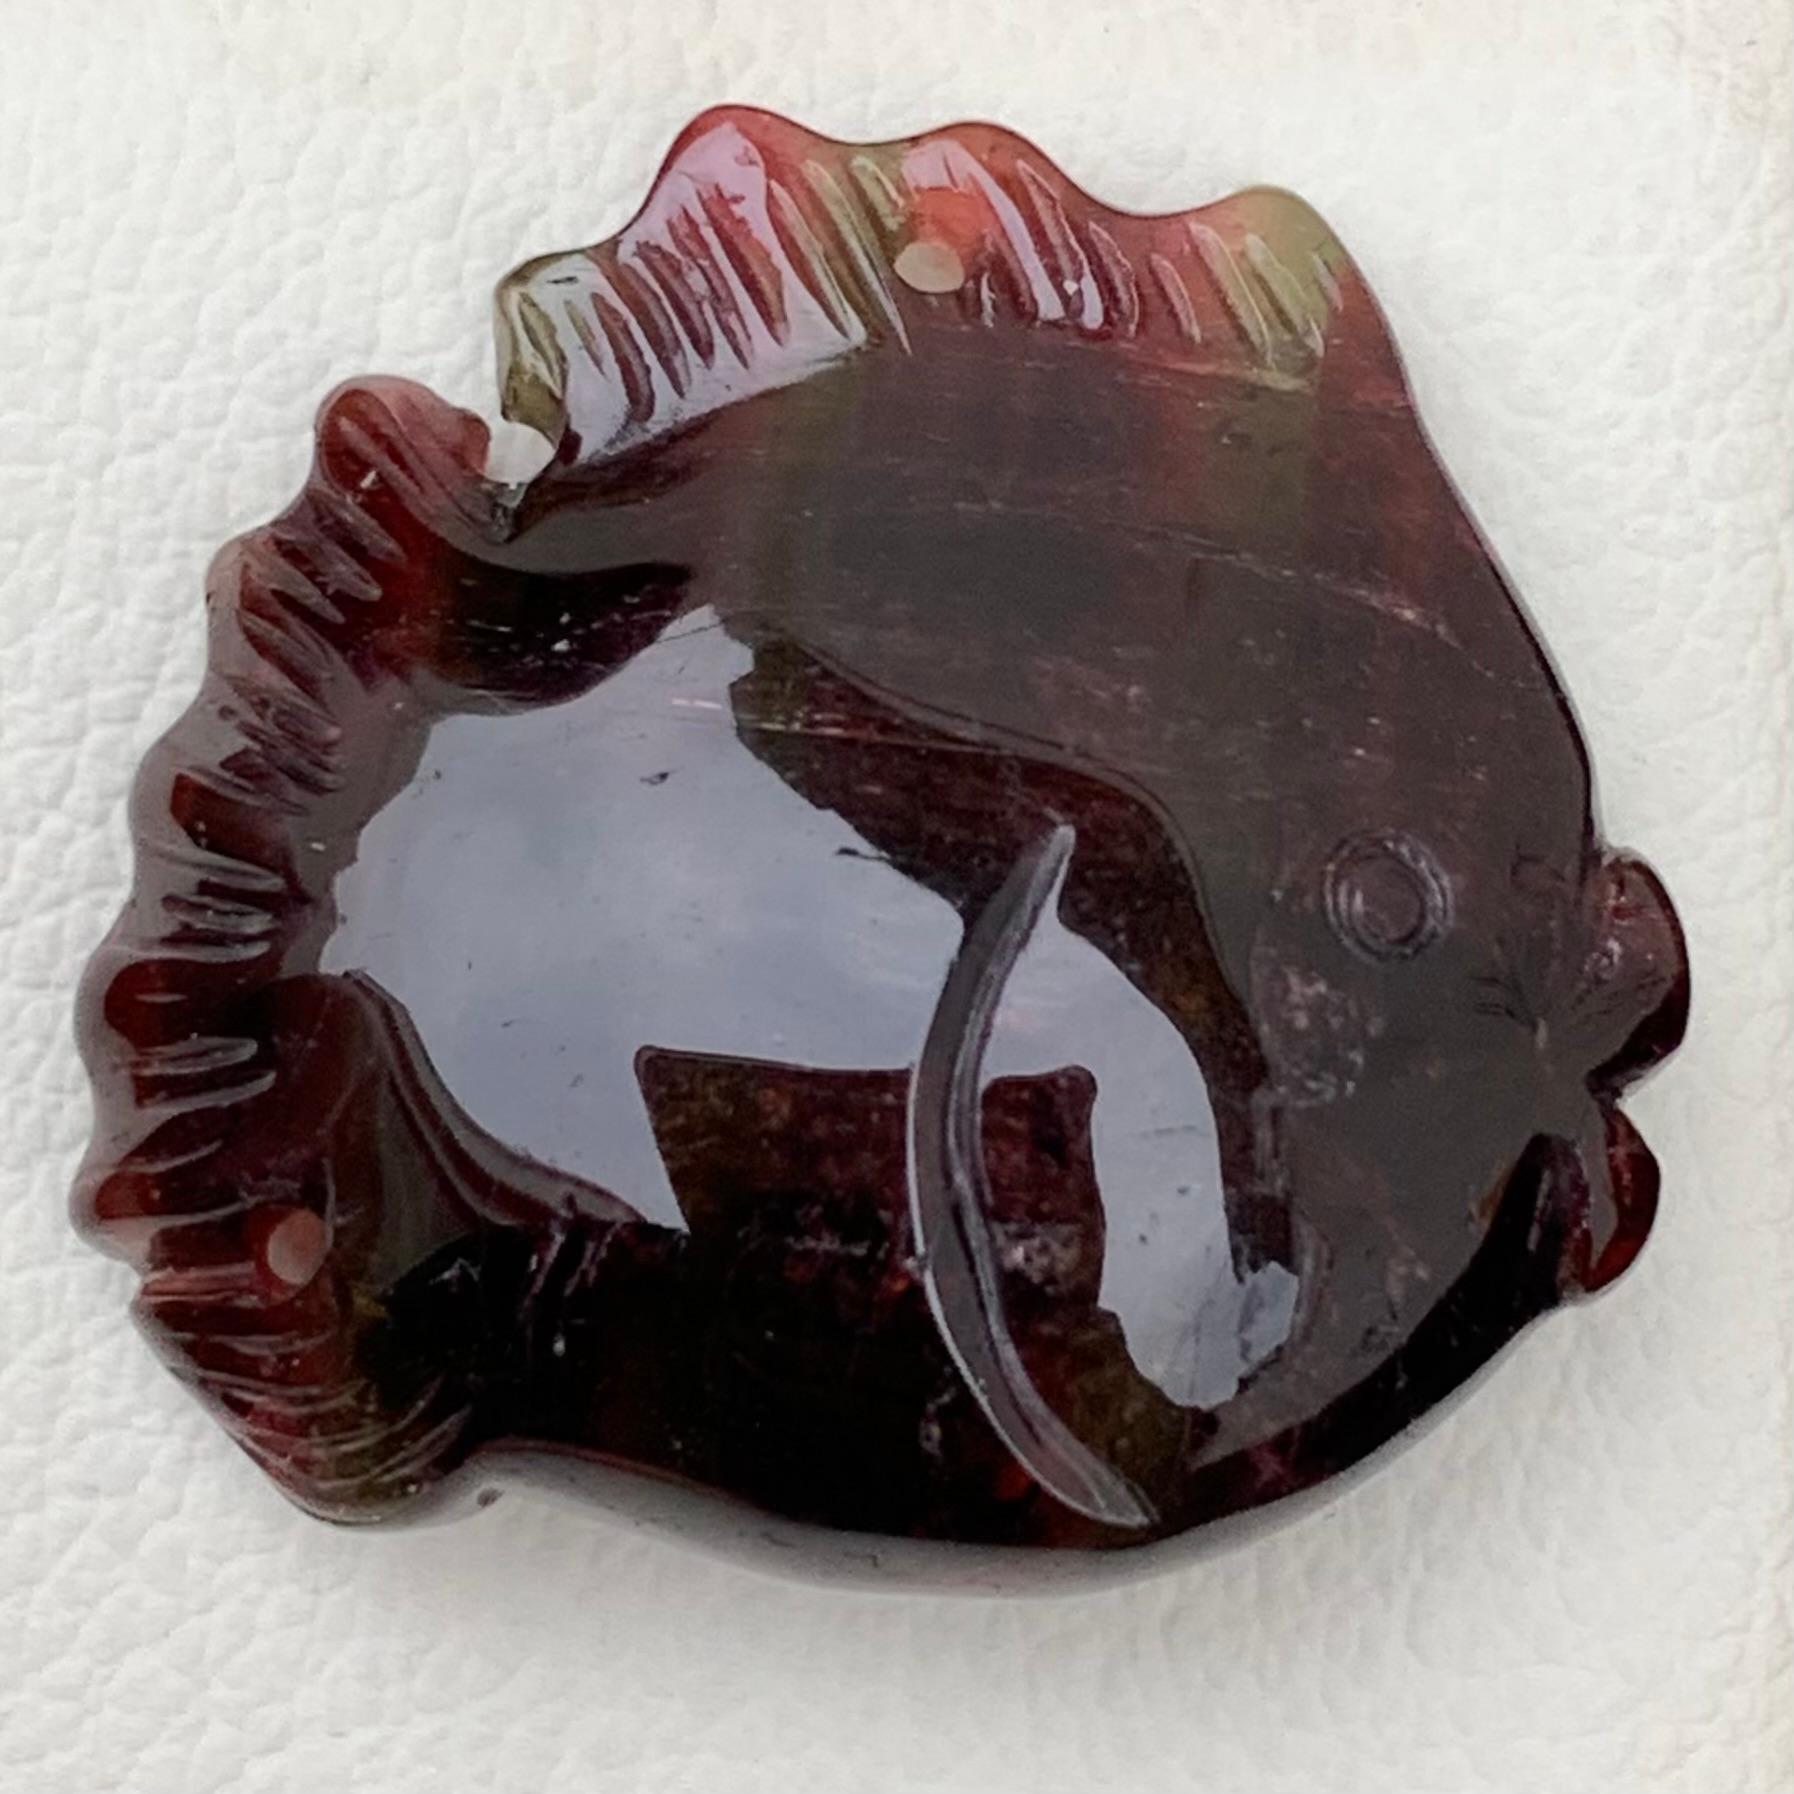 Carving Tourmaline
Weight: 37.10 Carats
Dimension: 23 x 25 x 9 Mm
Origin: Africa
Shape: Carving
Shape:  Fish 

Tourmaline carving is a specialized and intricate art form that involves sculpting or shaping tourmaline gemstones to create exquisite and